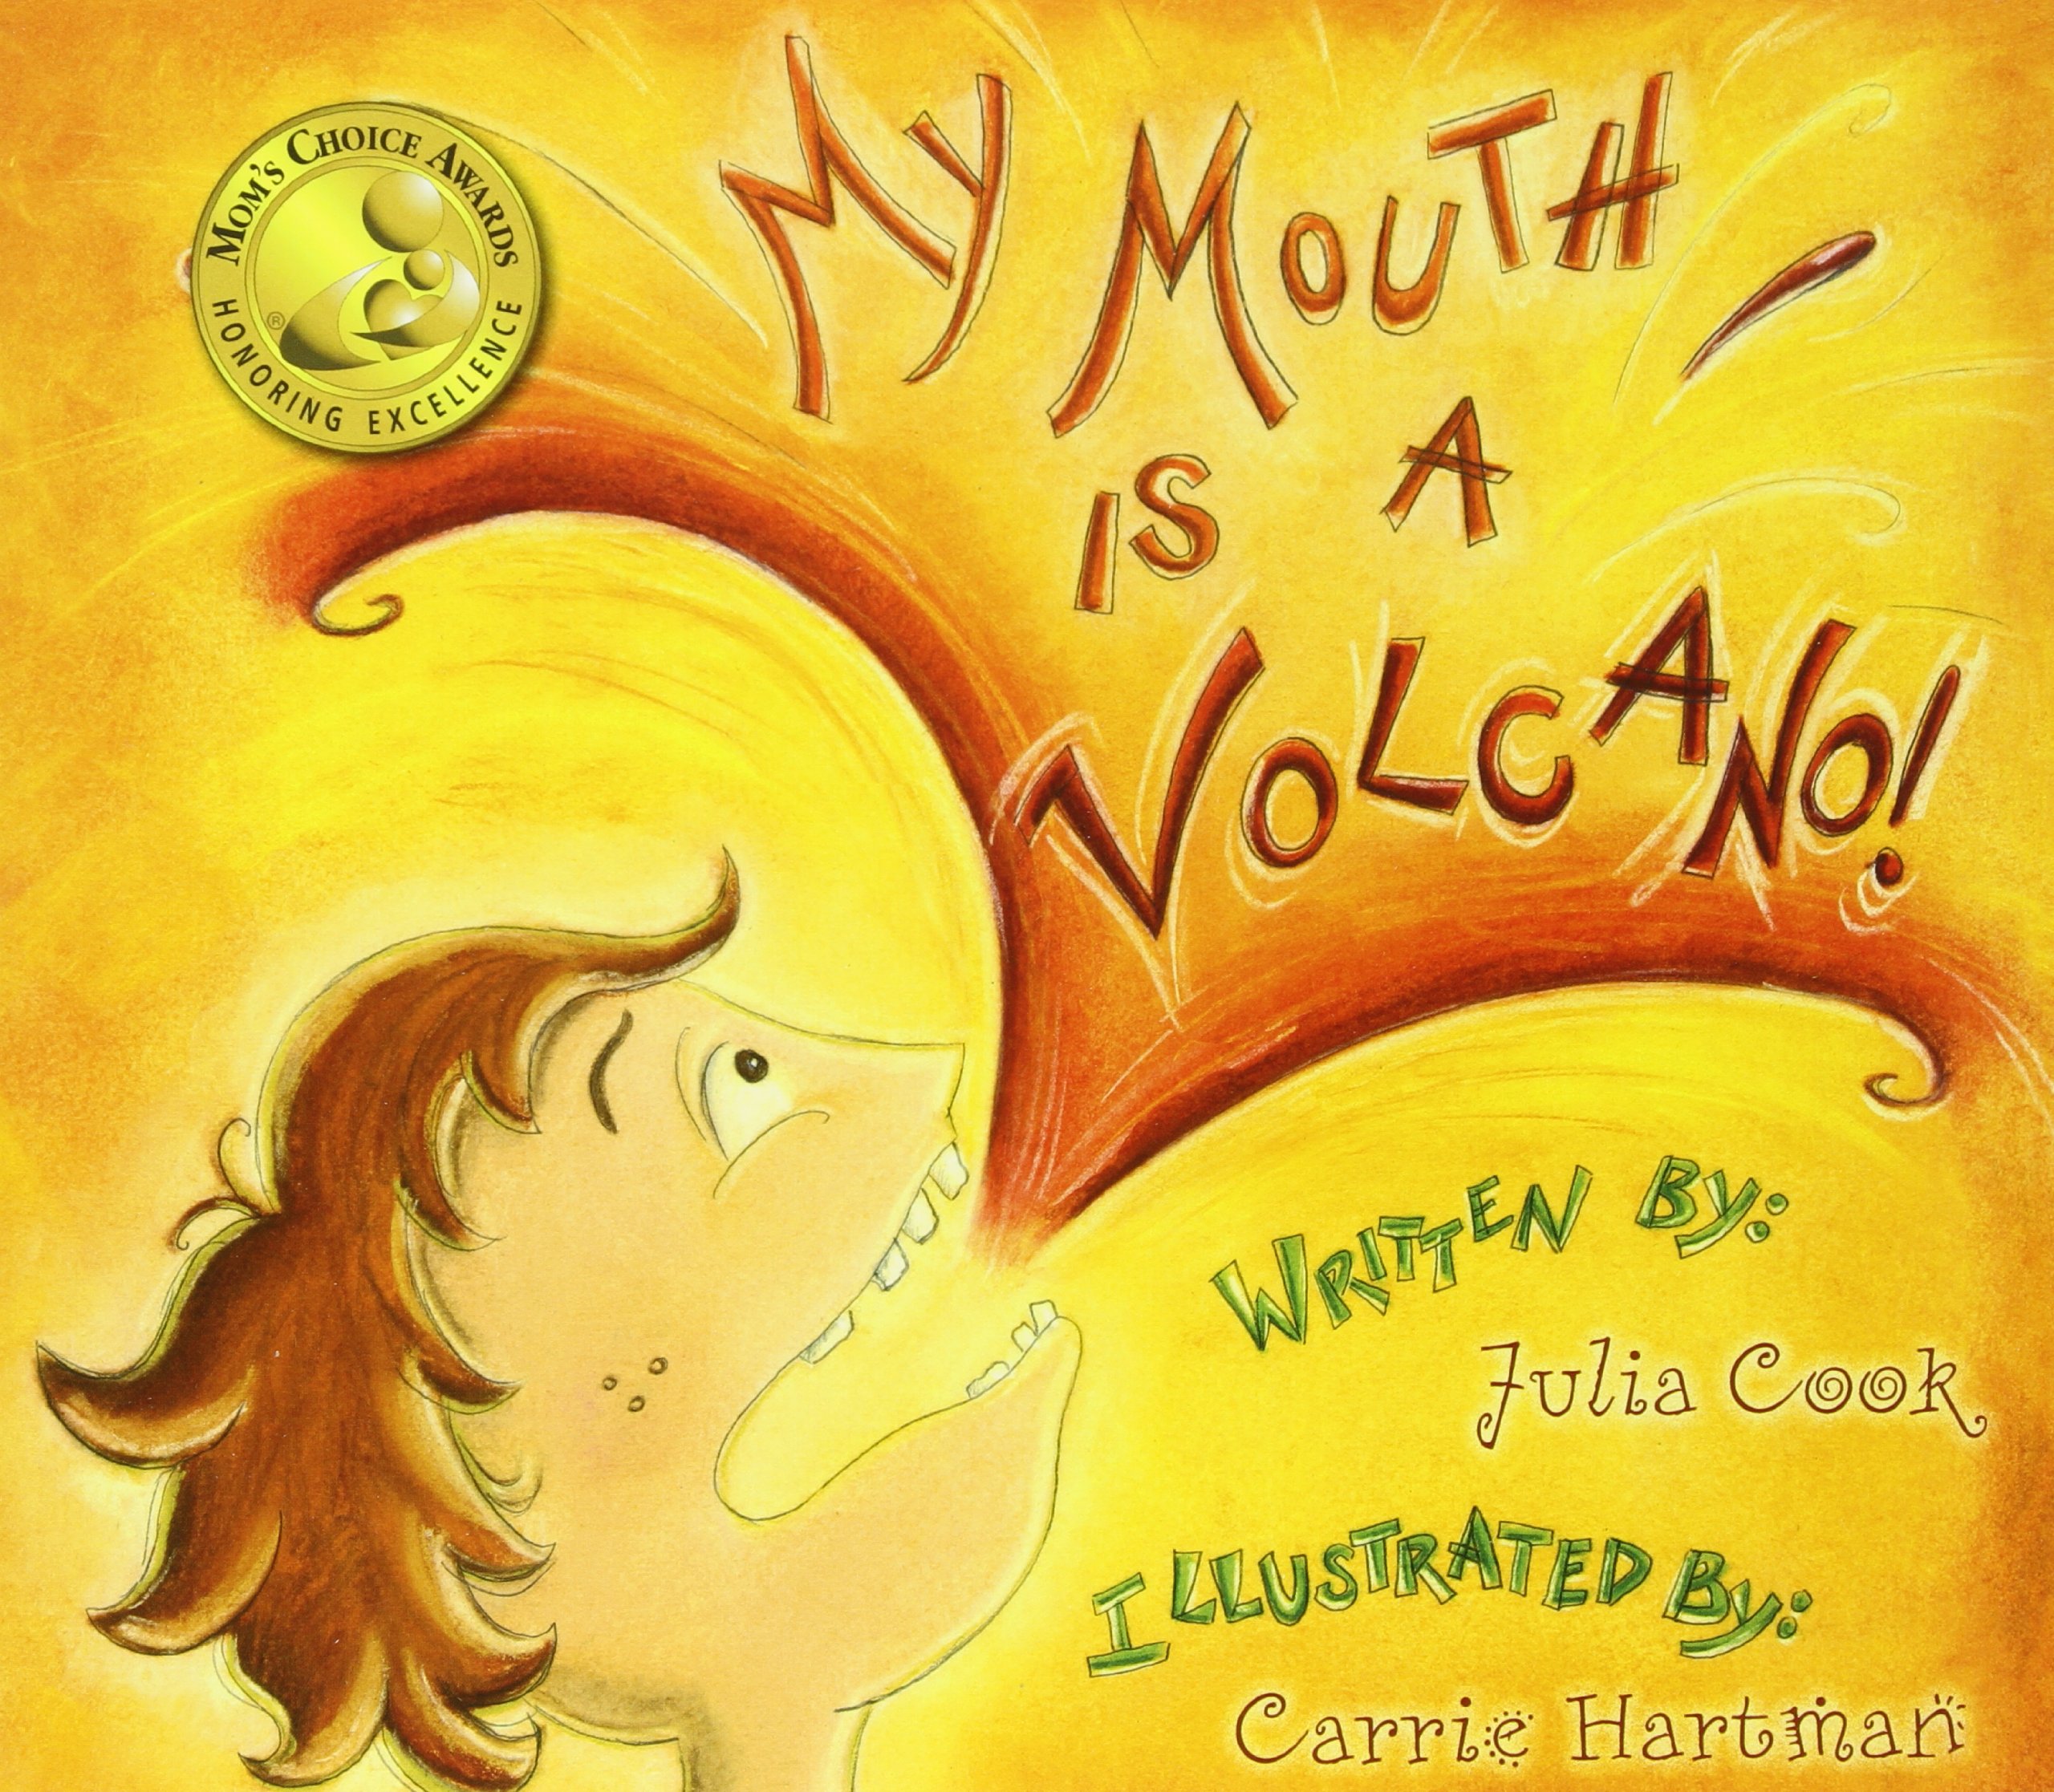 My Mouth Is A Volcano - Activity Ideas - My Everyday Classroom